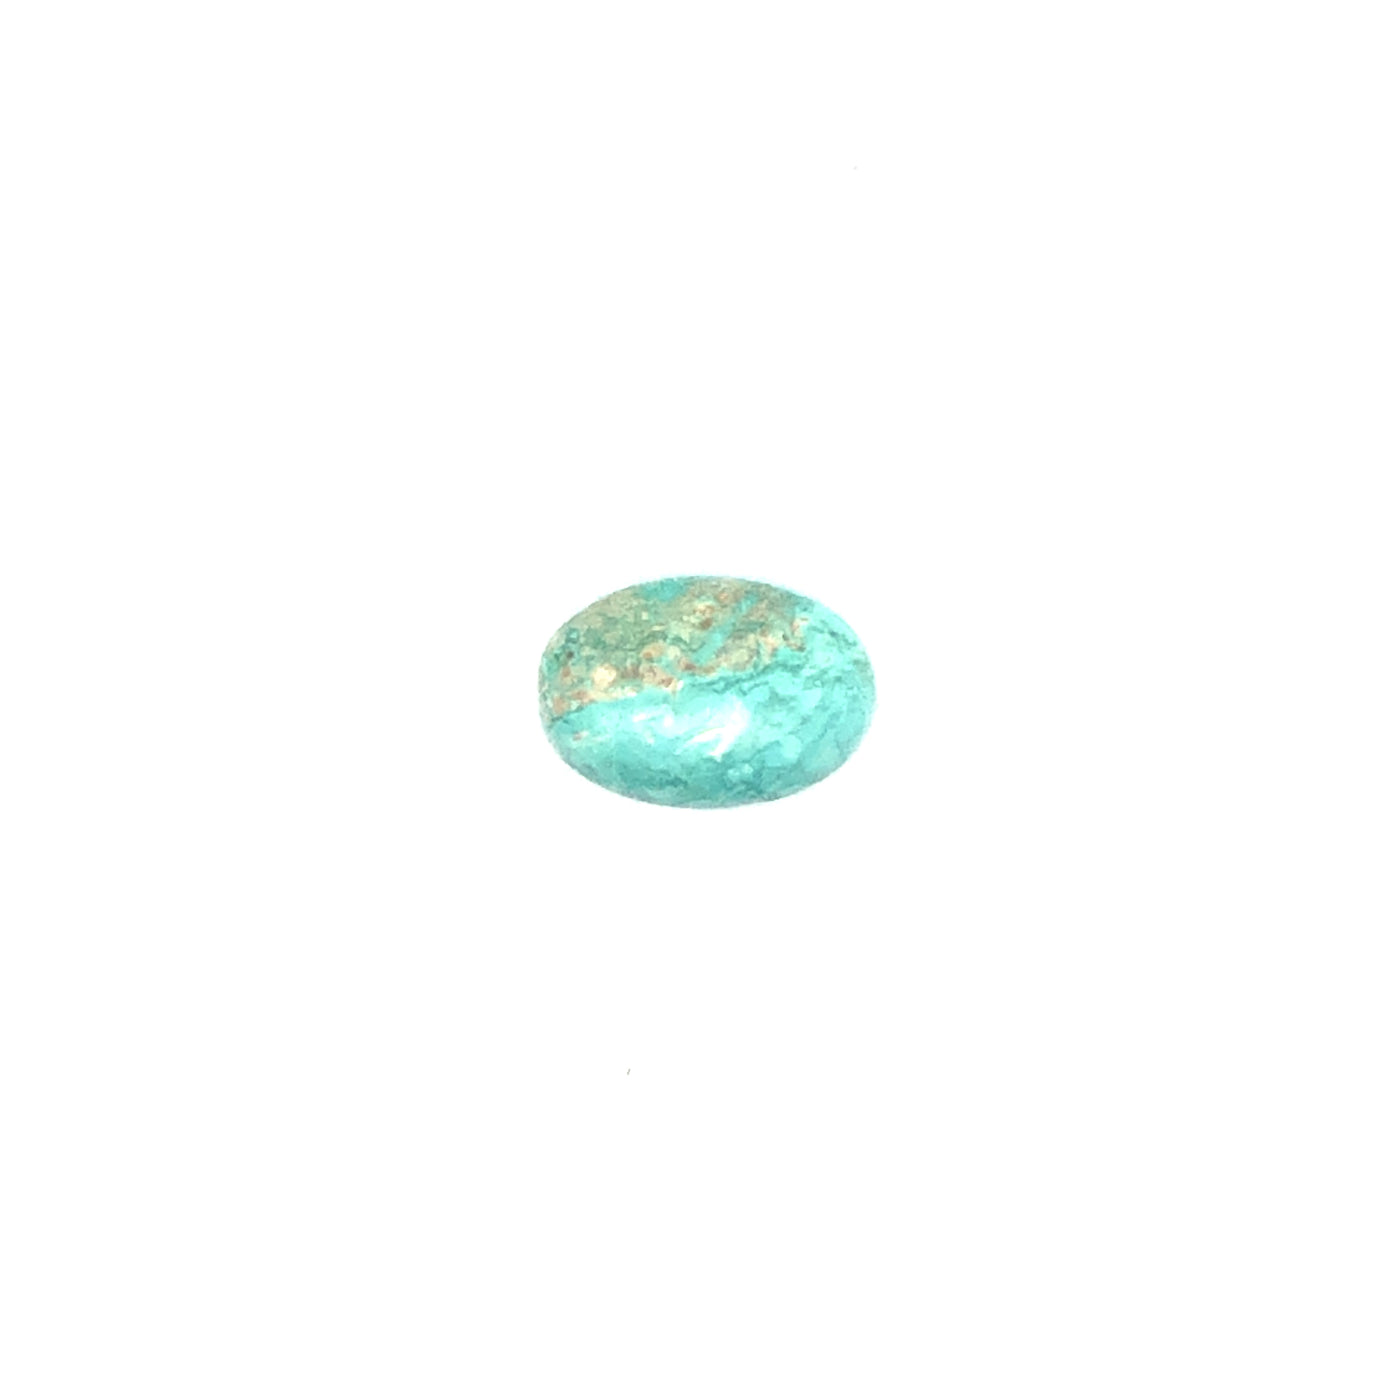 Loose Narooma Turquoise Oval Shaped 5.43Ct Blue With Some White